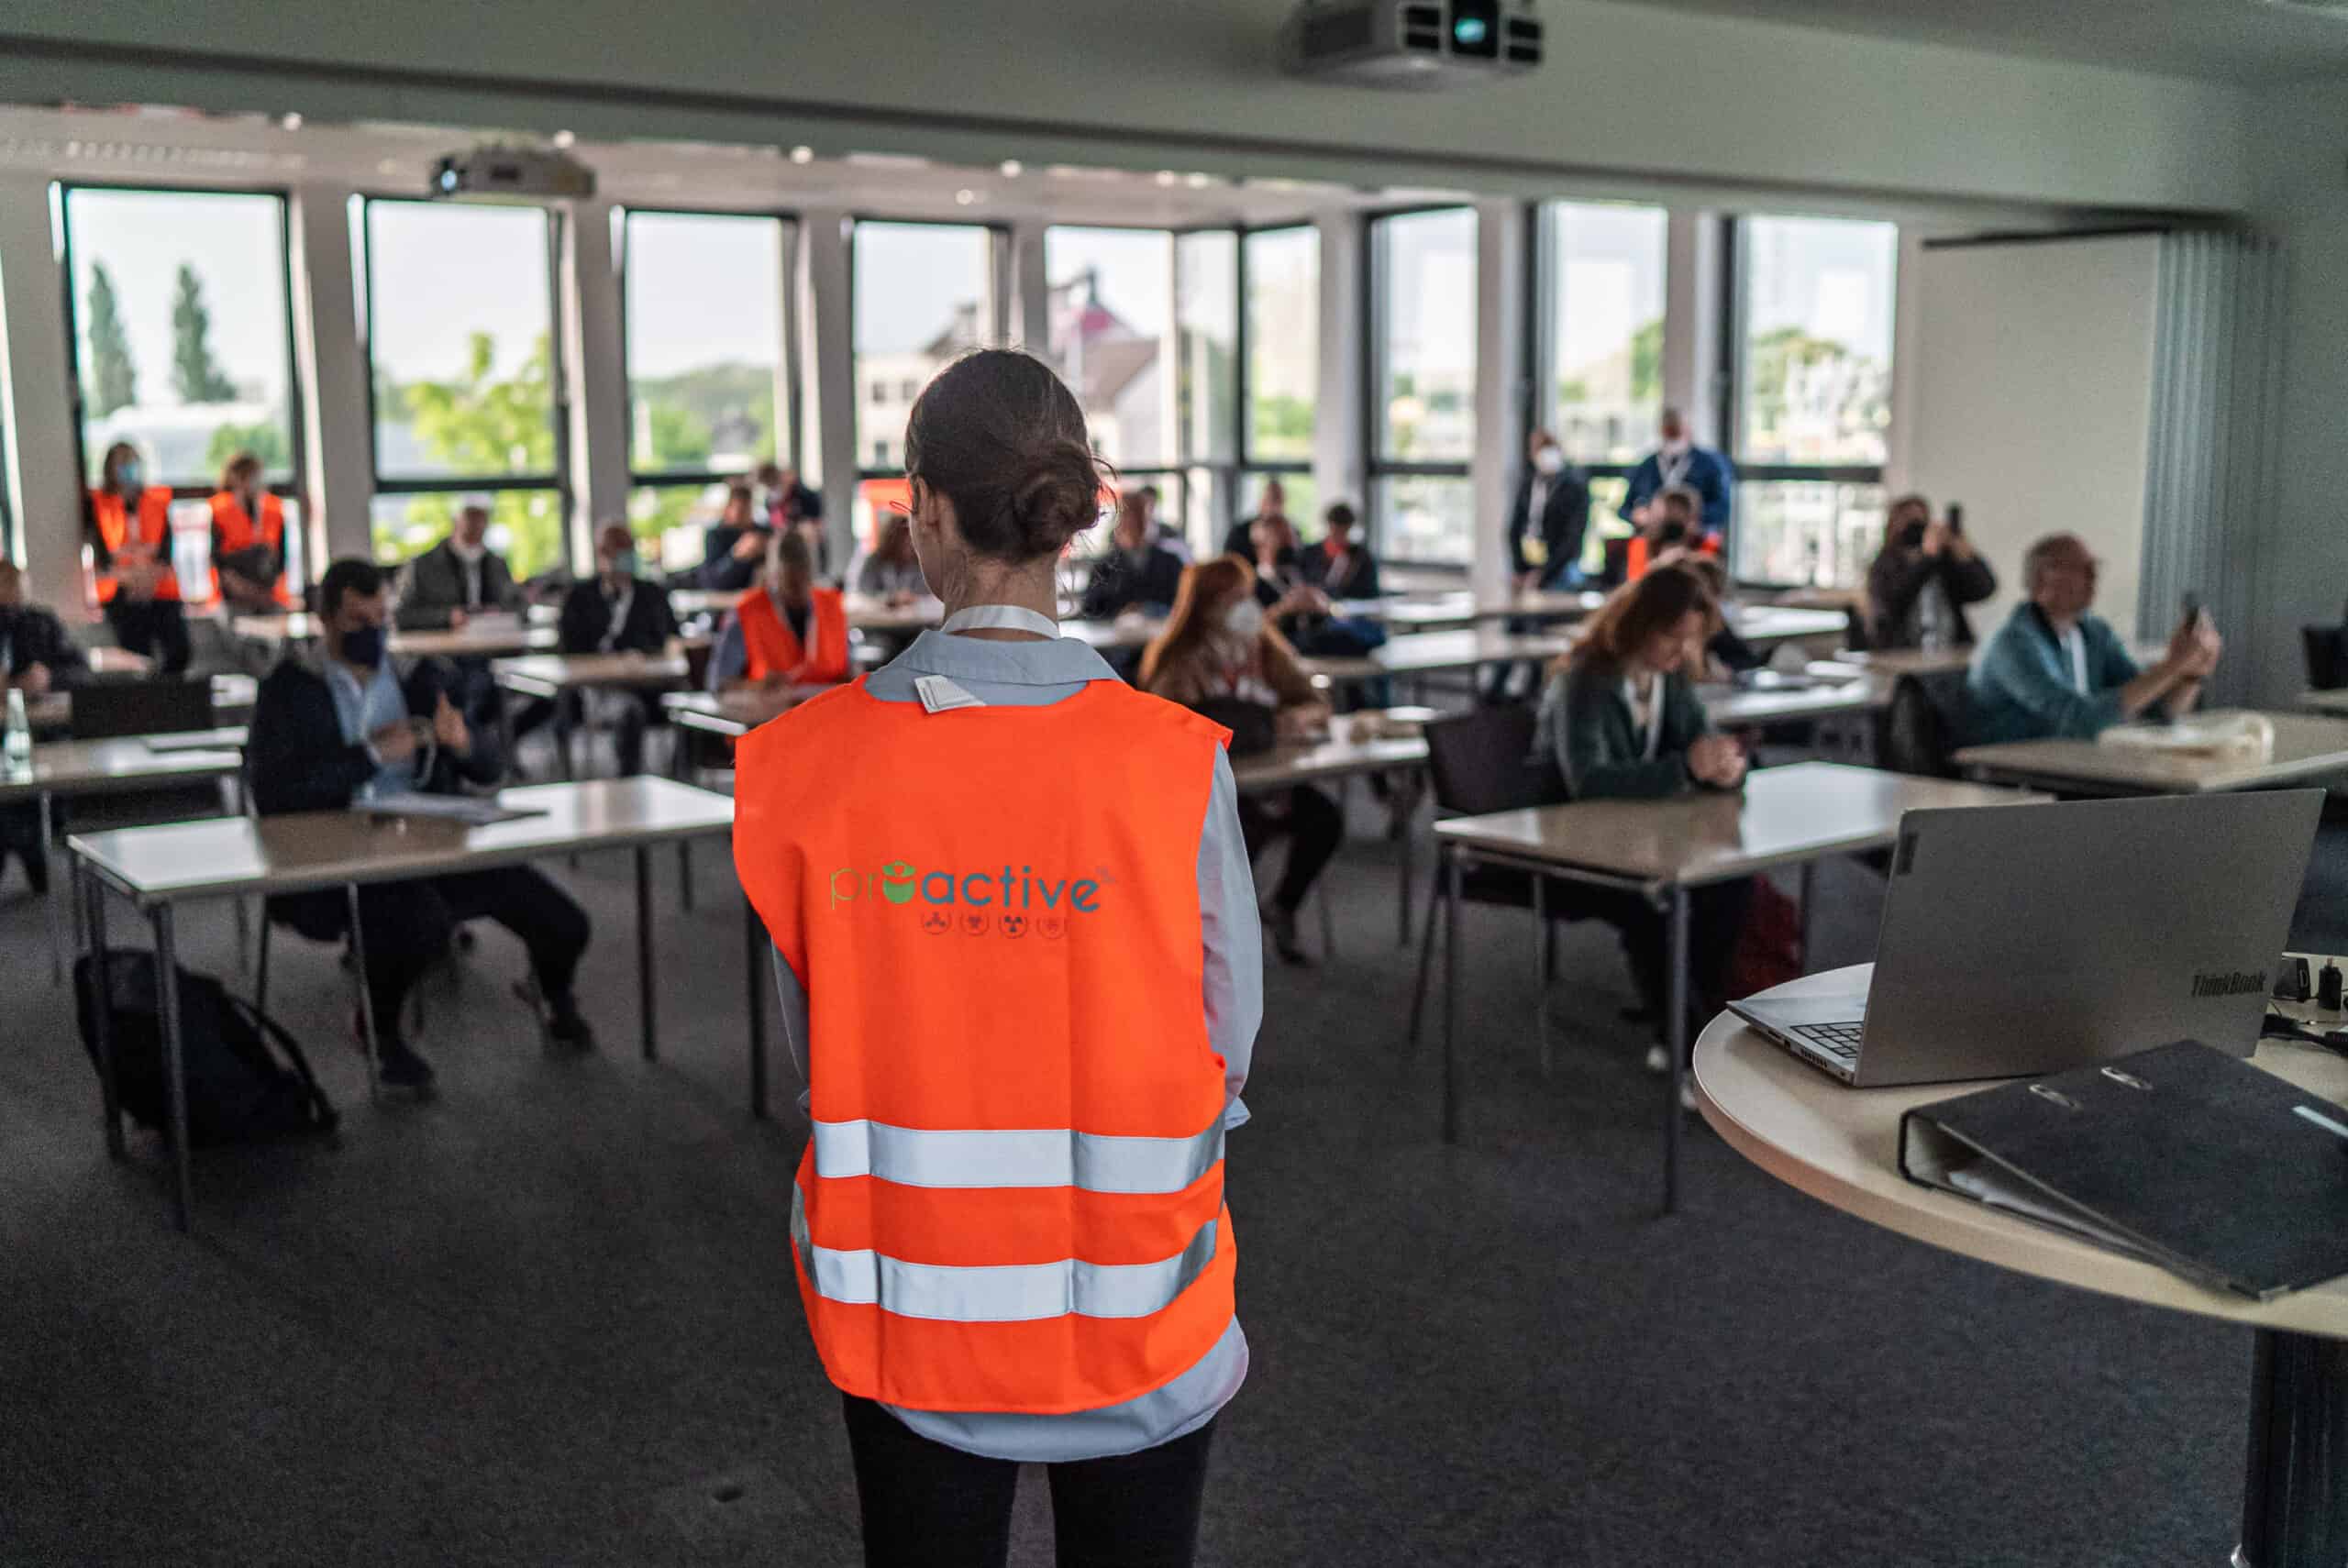 A female PROACTIVE partner wearing an orange waistcoat is standing and looking to participants. In the background, blurred, around 20 people are seated at desks.re sitting